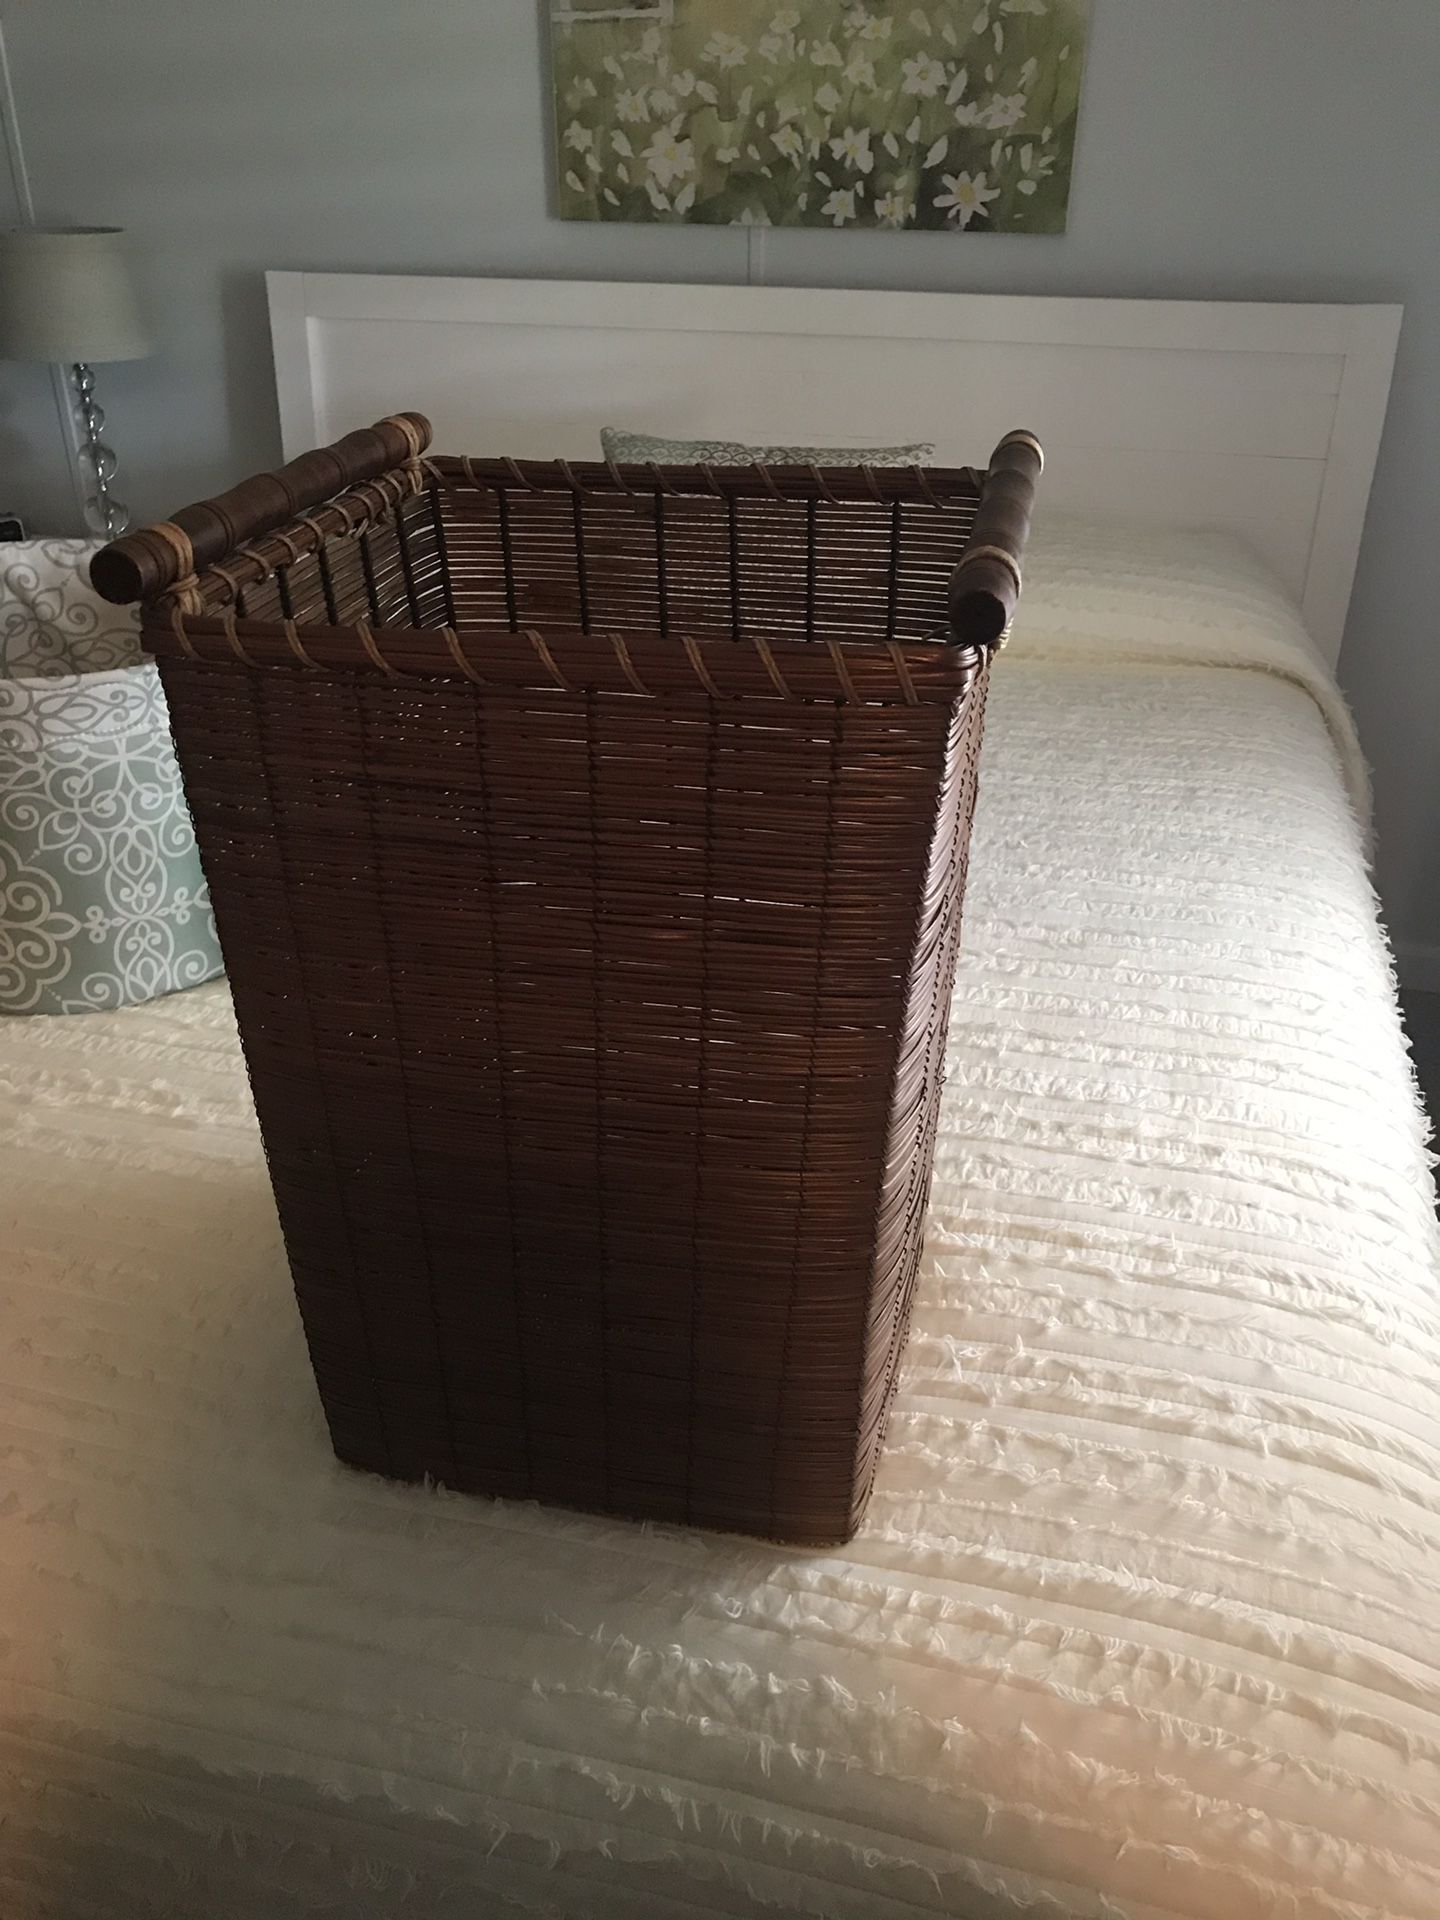 Small brown wooden hamper or storage container